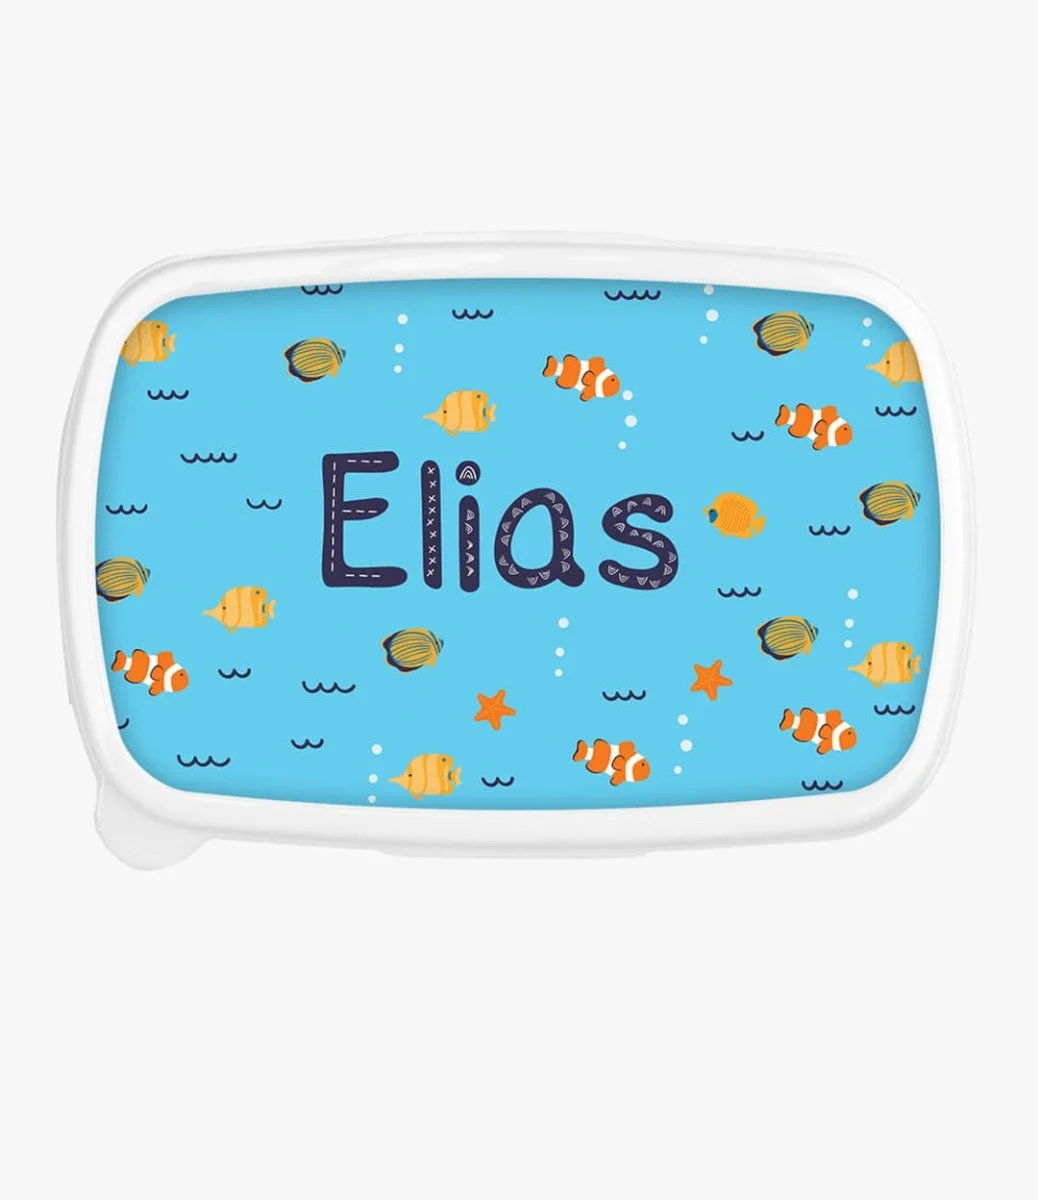 School Lunchbox With Fish Drawings For Kids